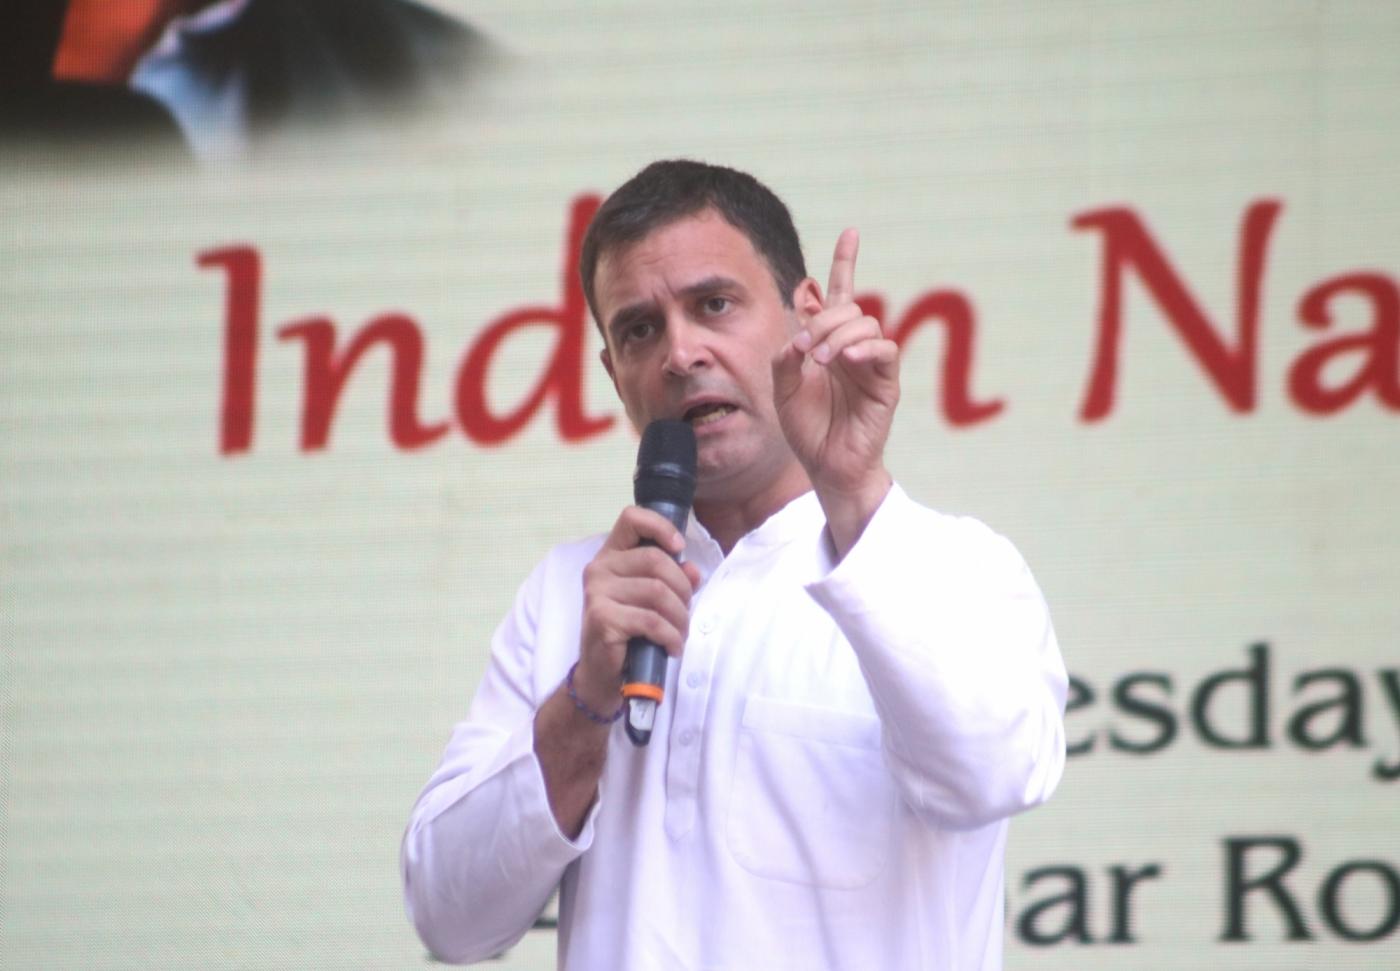 New Delhi: Congress President Rahul Gandhi addresses at the launch of party's election manifesto for the 2019 Lok Sabha polls, in New Delhi on April 2, 2019. (Photo: IANS) by .